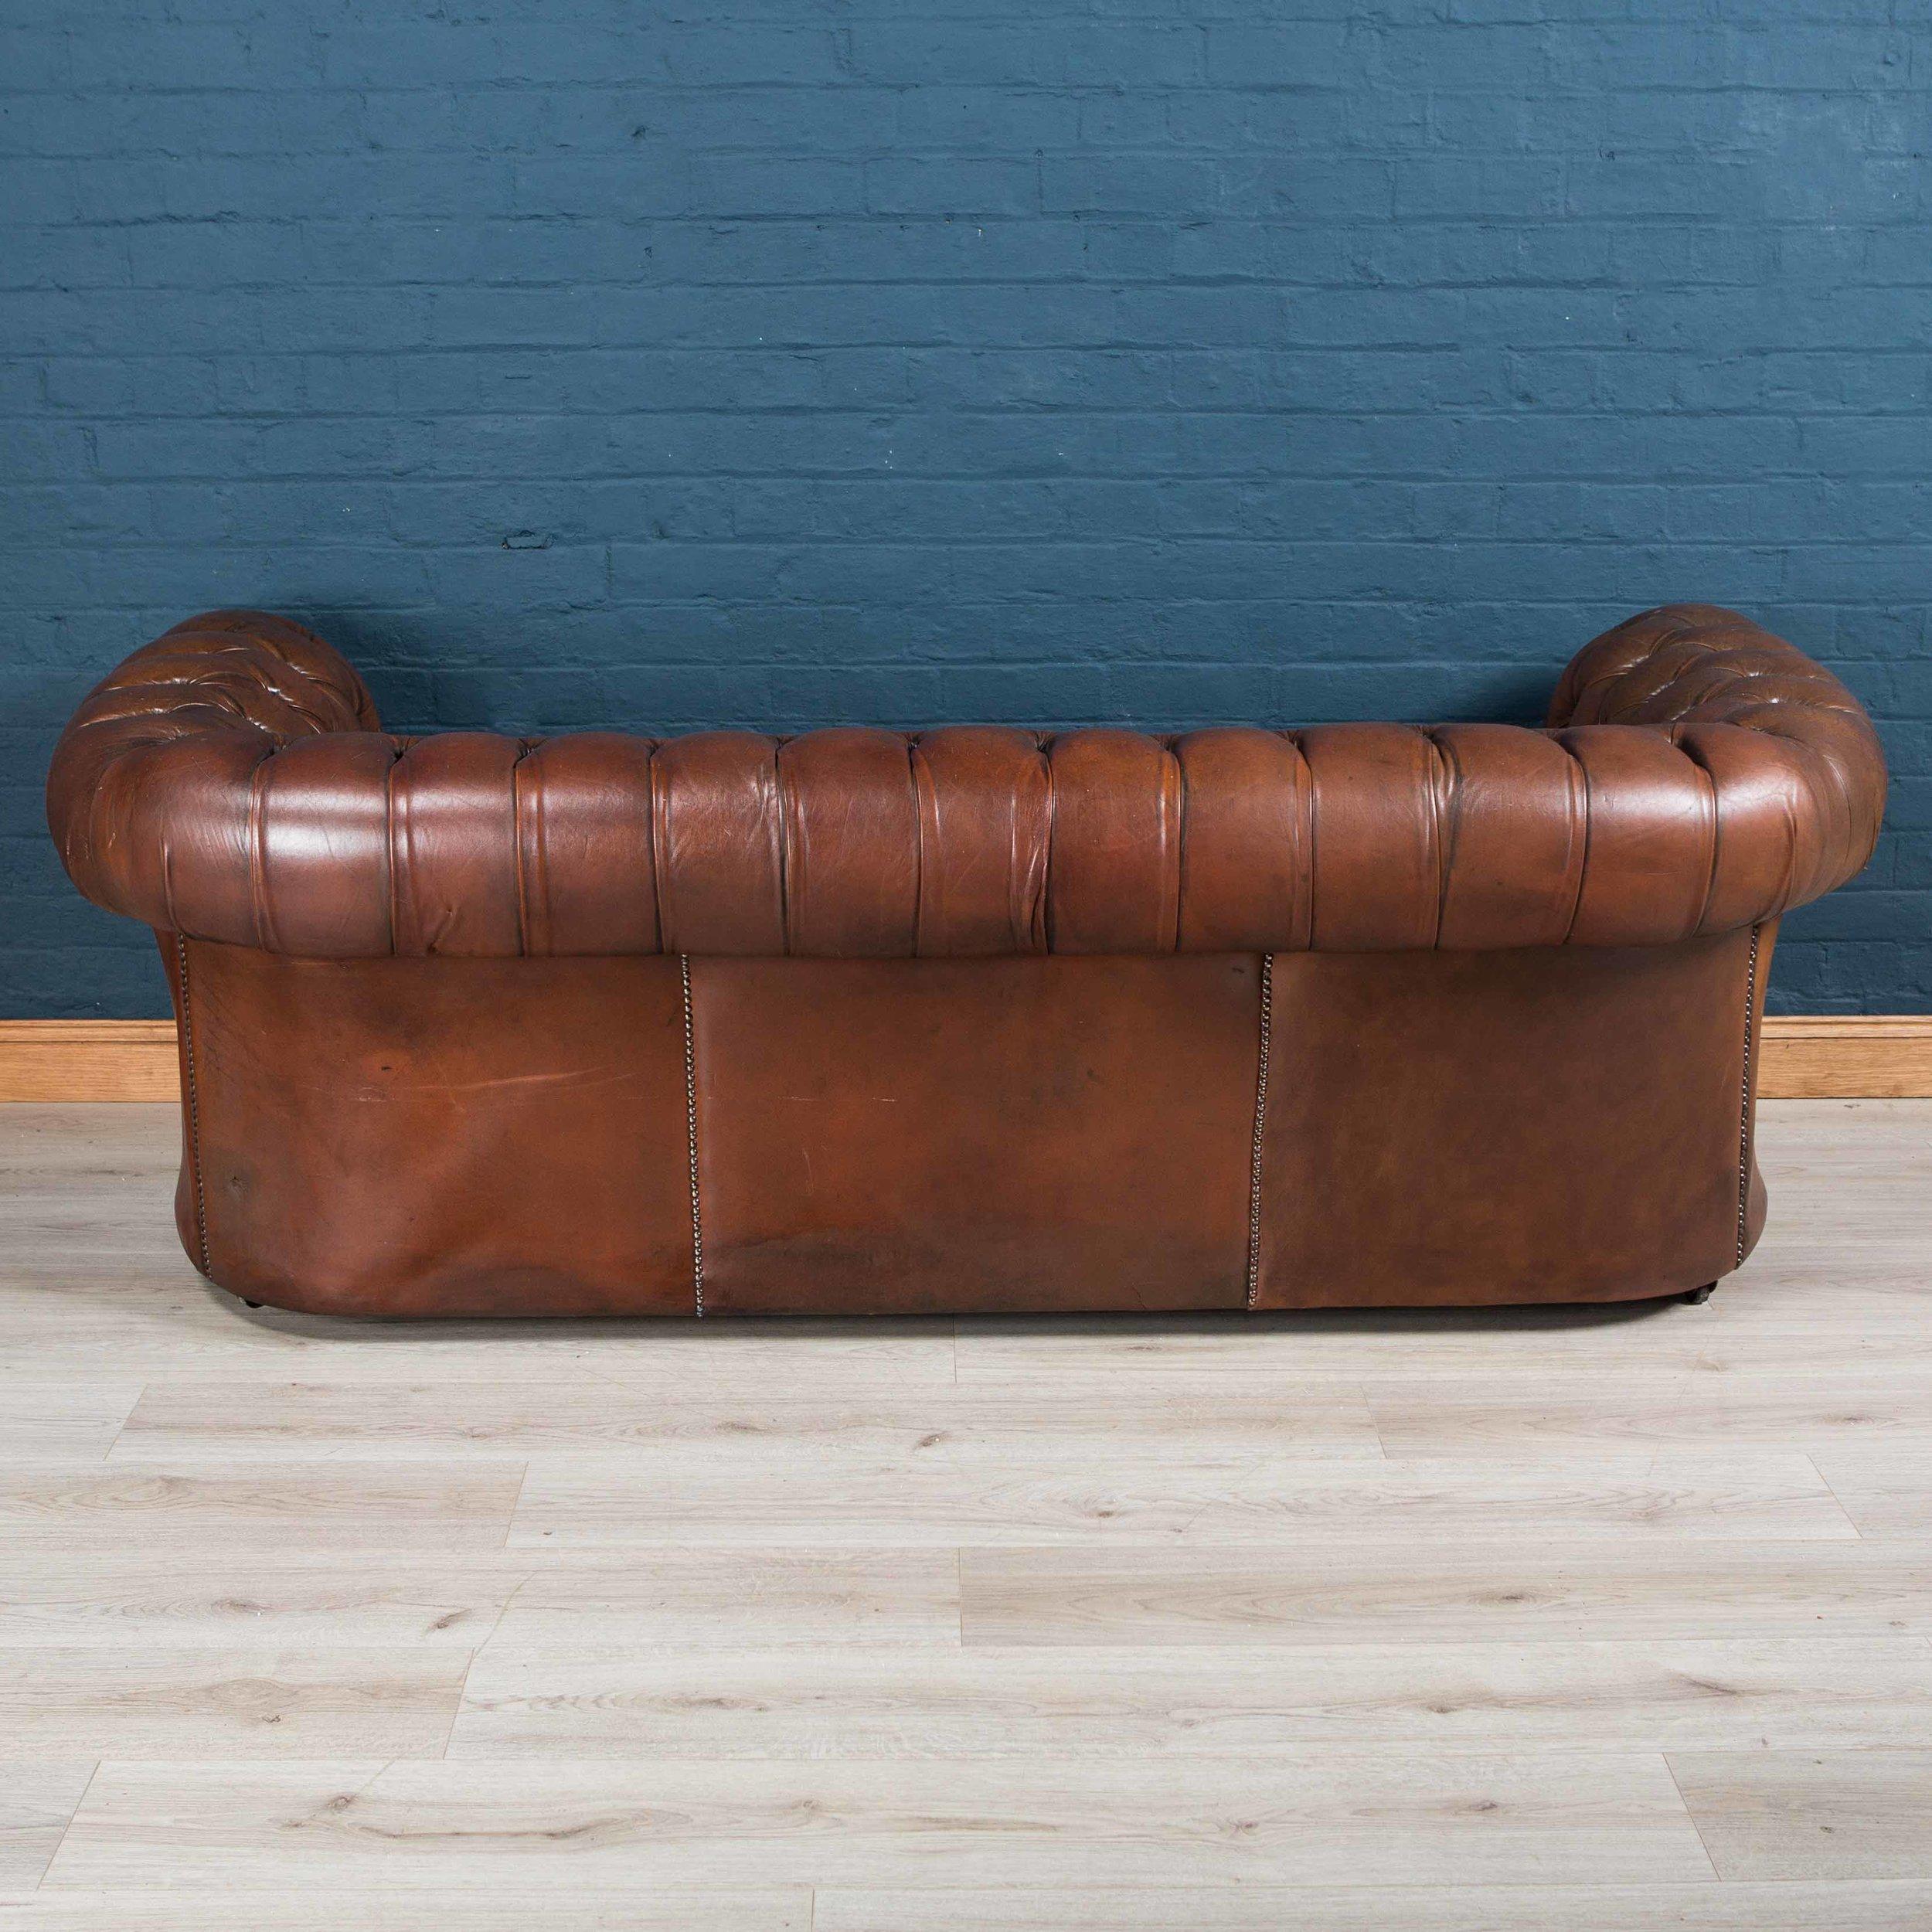 Superb early to mid-20th century leather Chesterfield sofa. One of the most elegant models with button down seating, this is a fashionable evergreen capable of uplifting the interior space of any contemporary or traditional home, the Classic color